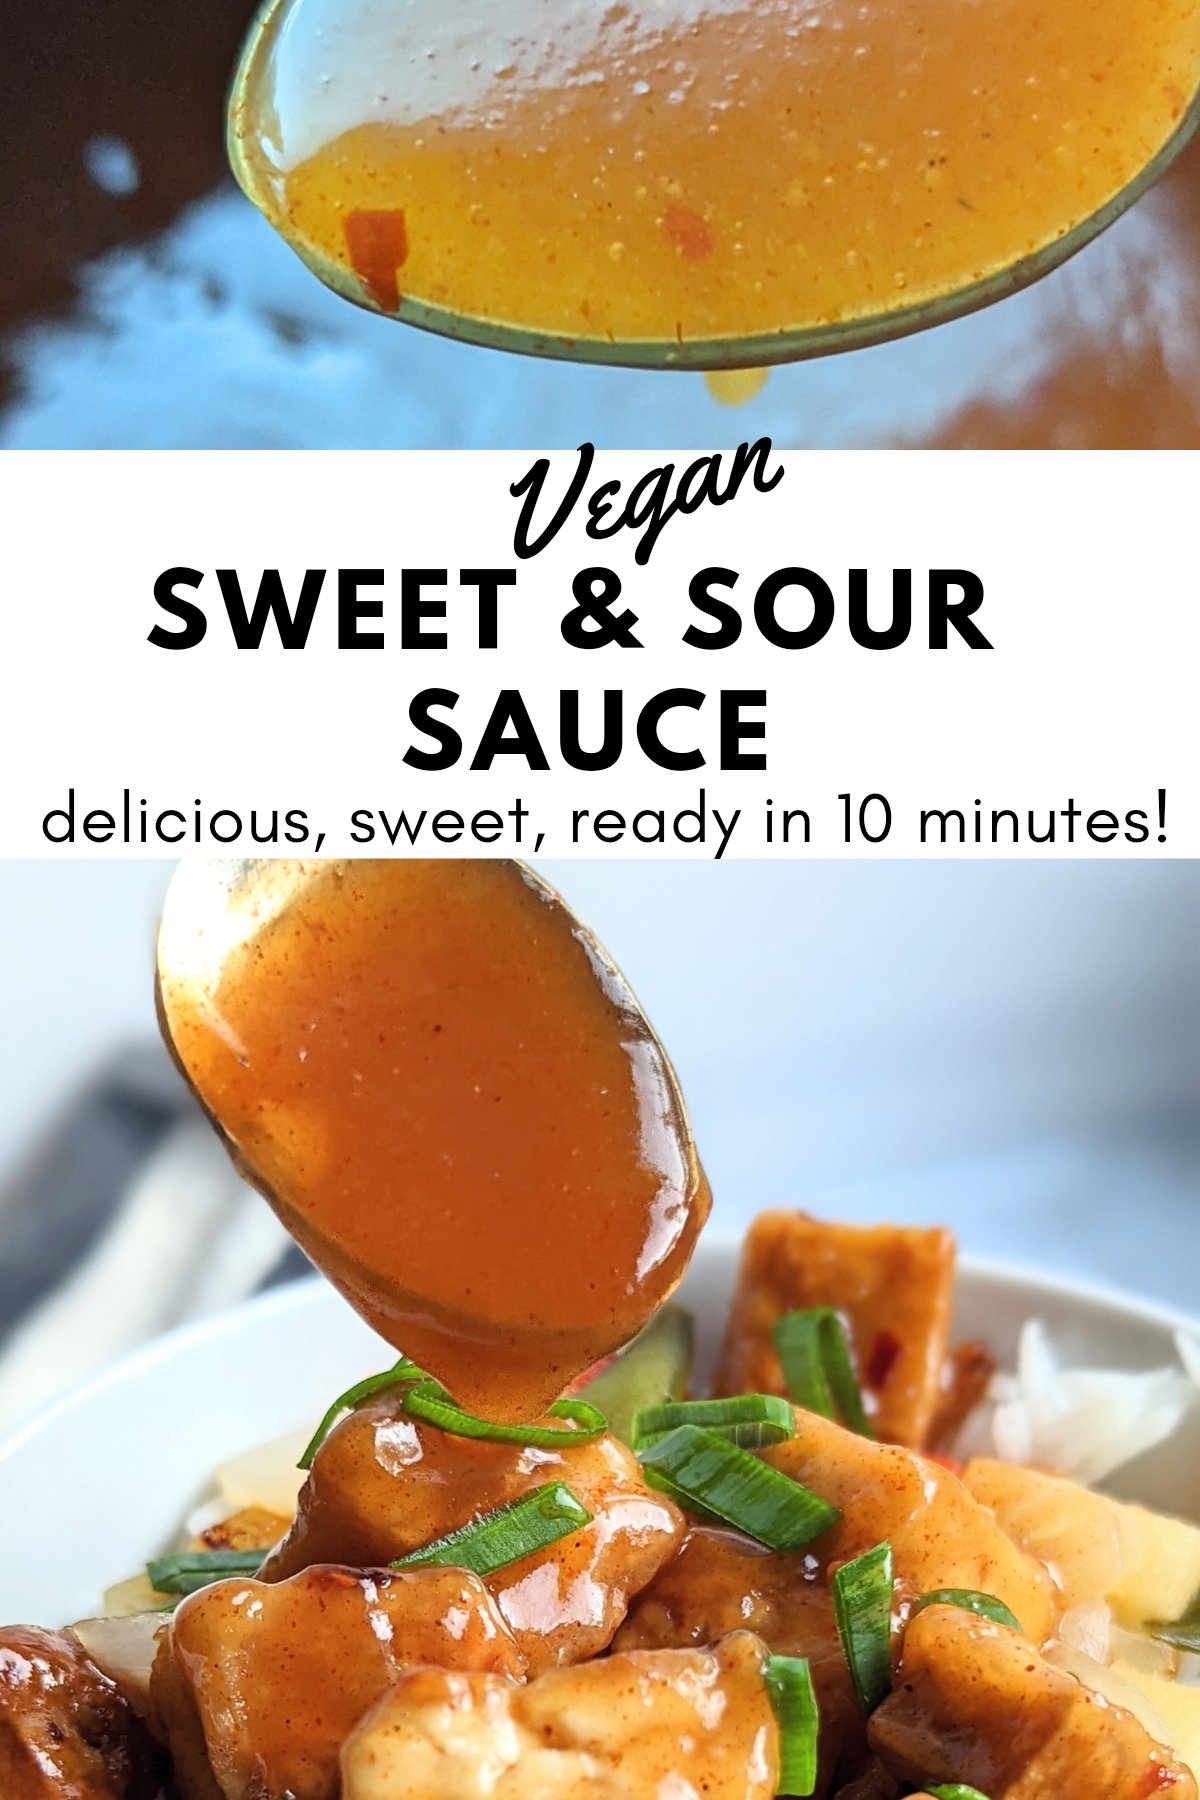 sweet and sour sauce vegan gluten free option thick sweet and sour sauce recipe healthy asian sauces at home restaurant quality